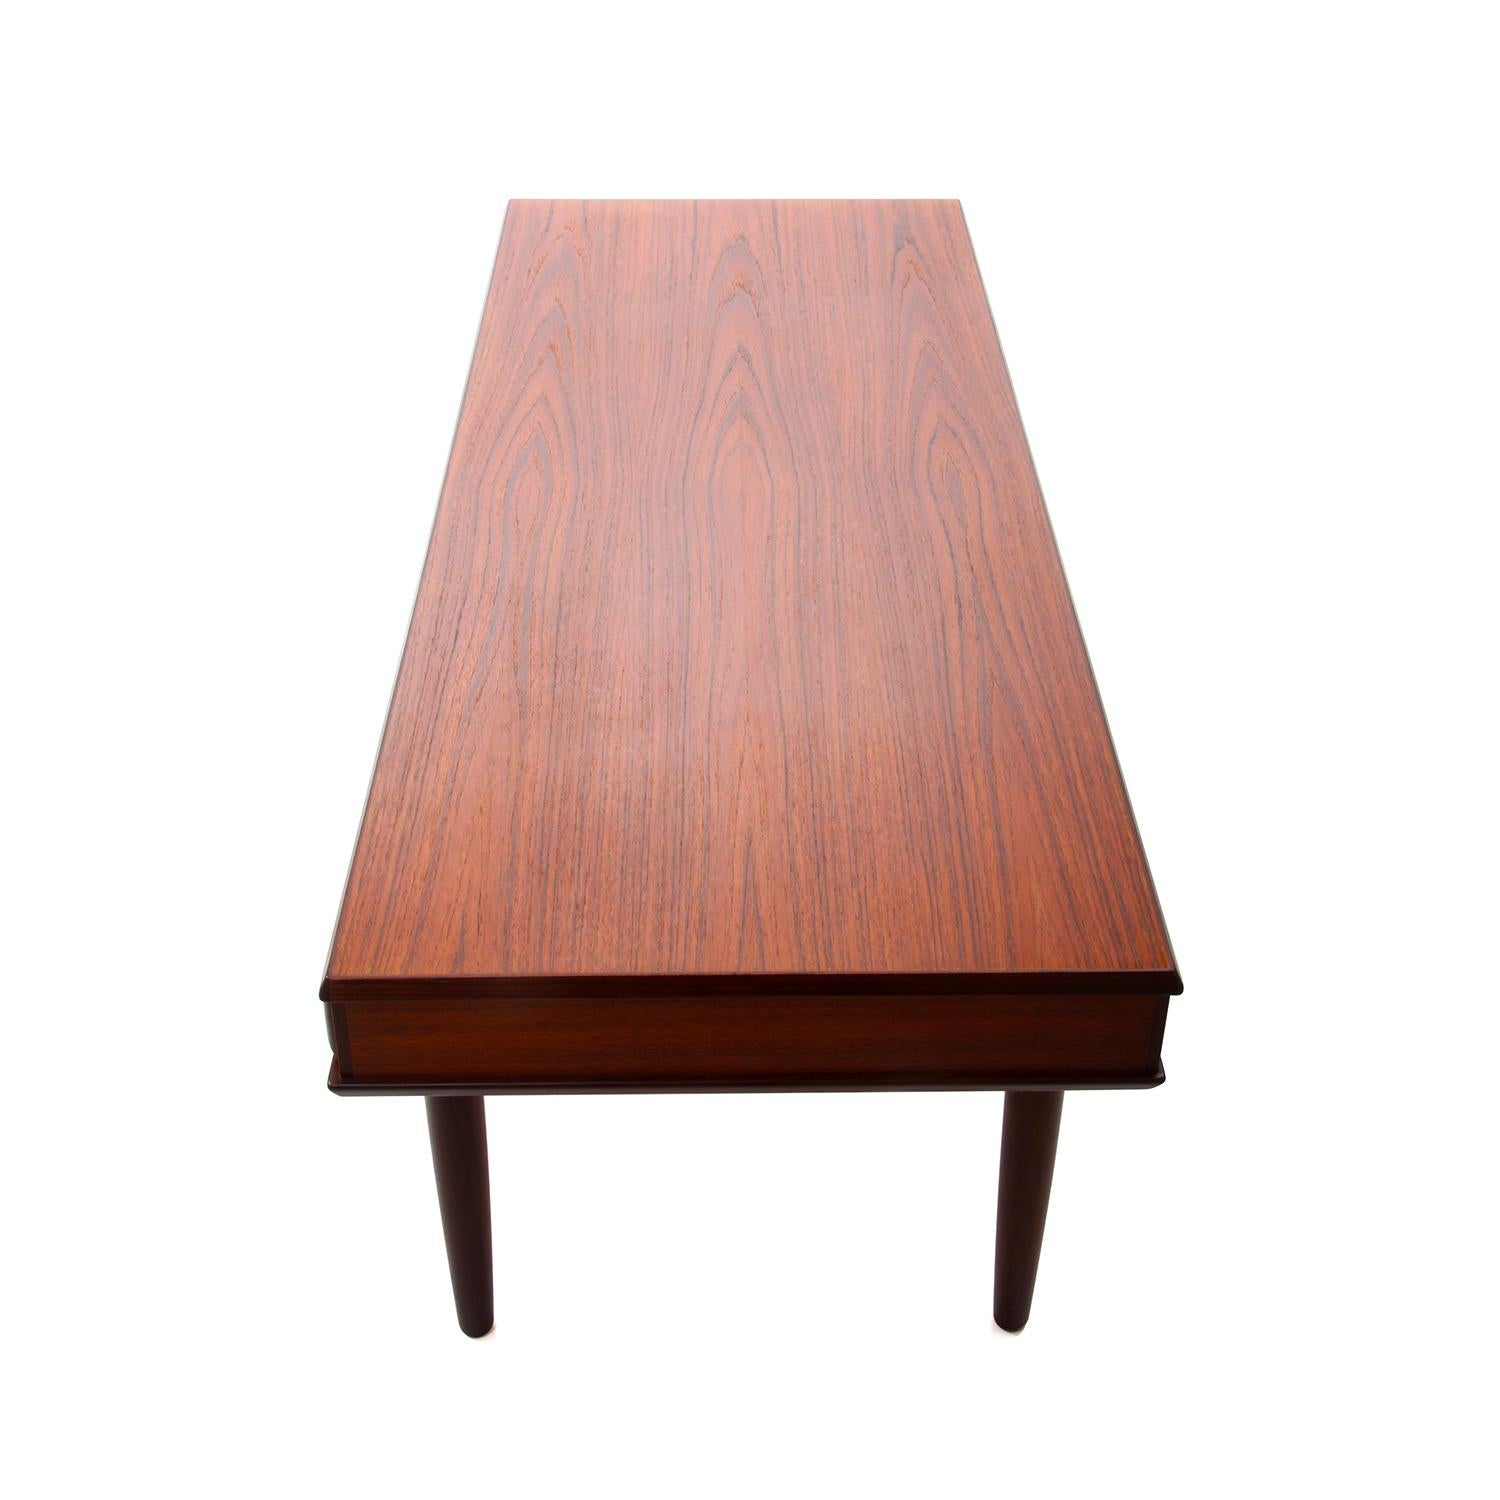 Teak Coffee Table by Danish Furniture Maker, 1960s, with Shelf and Two Drawers 2